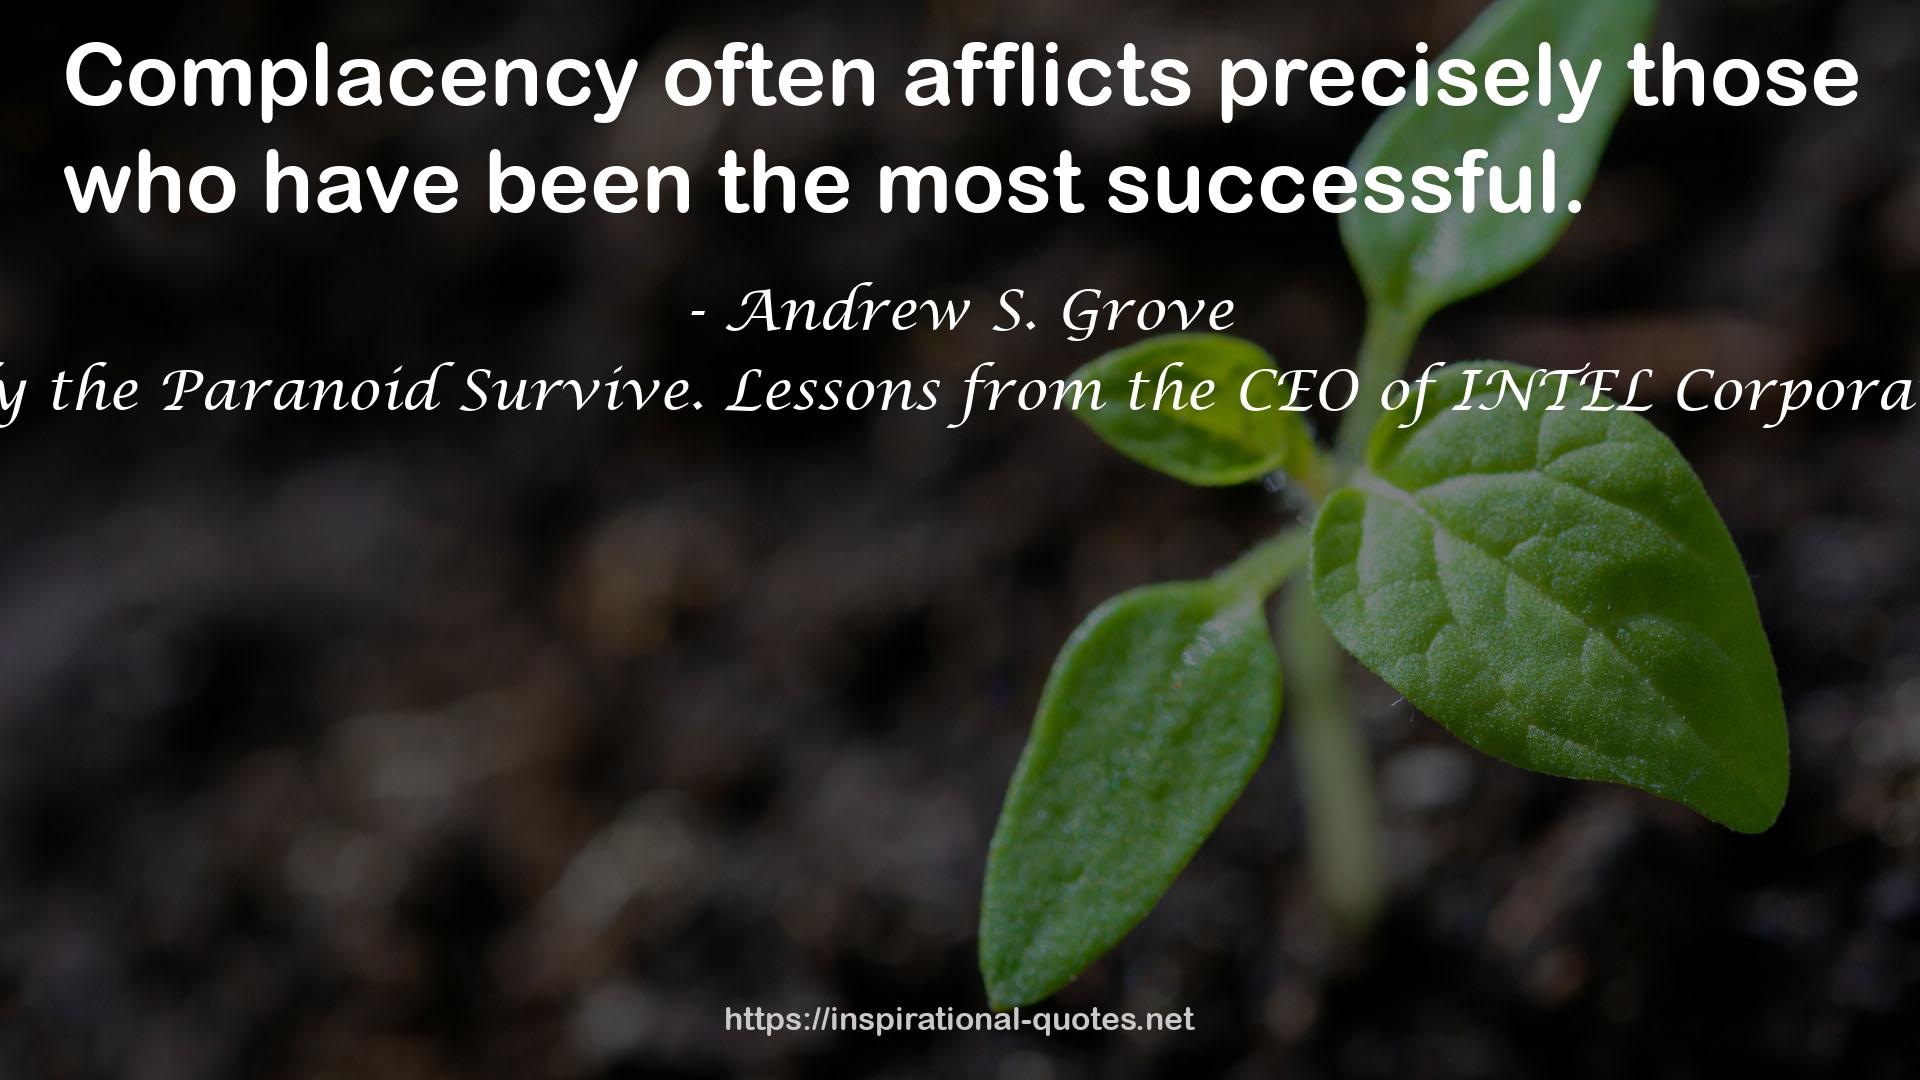 Only the Paranoid Survive. Lessons from the CEO of INTEL Corporation QUOTES